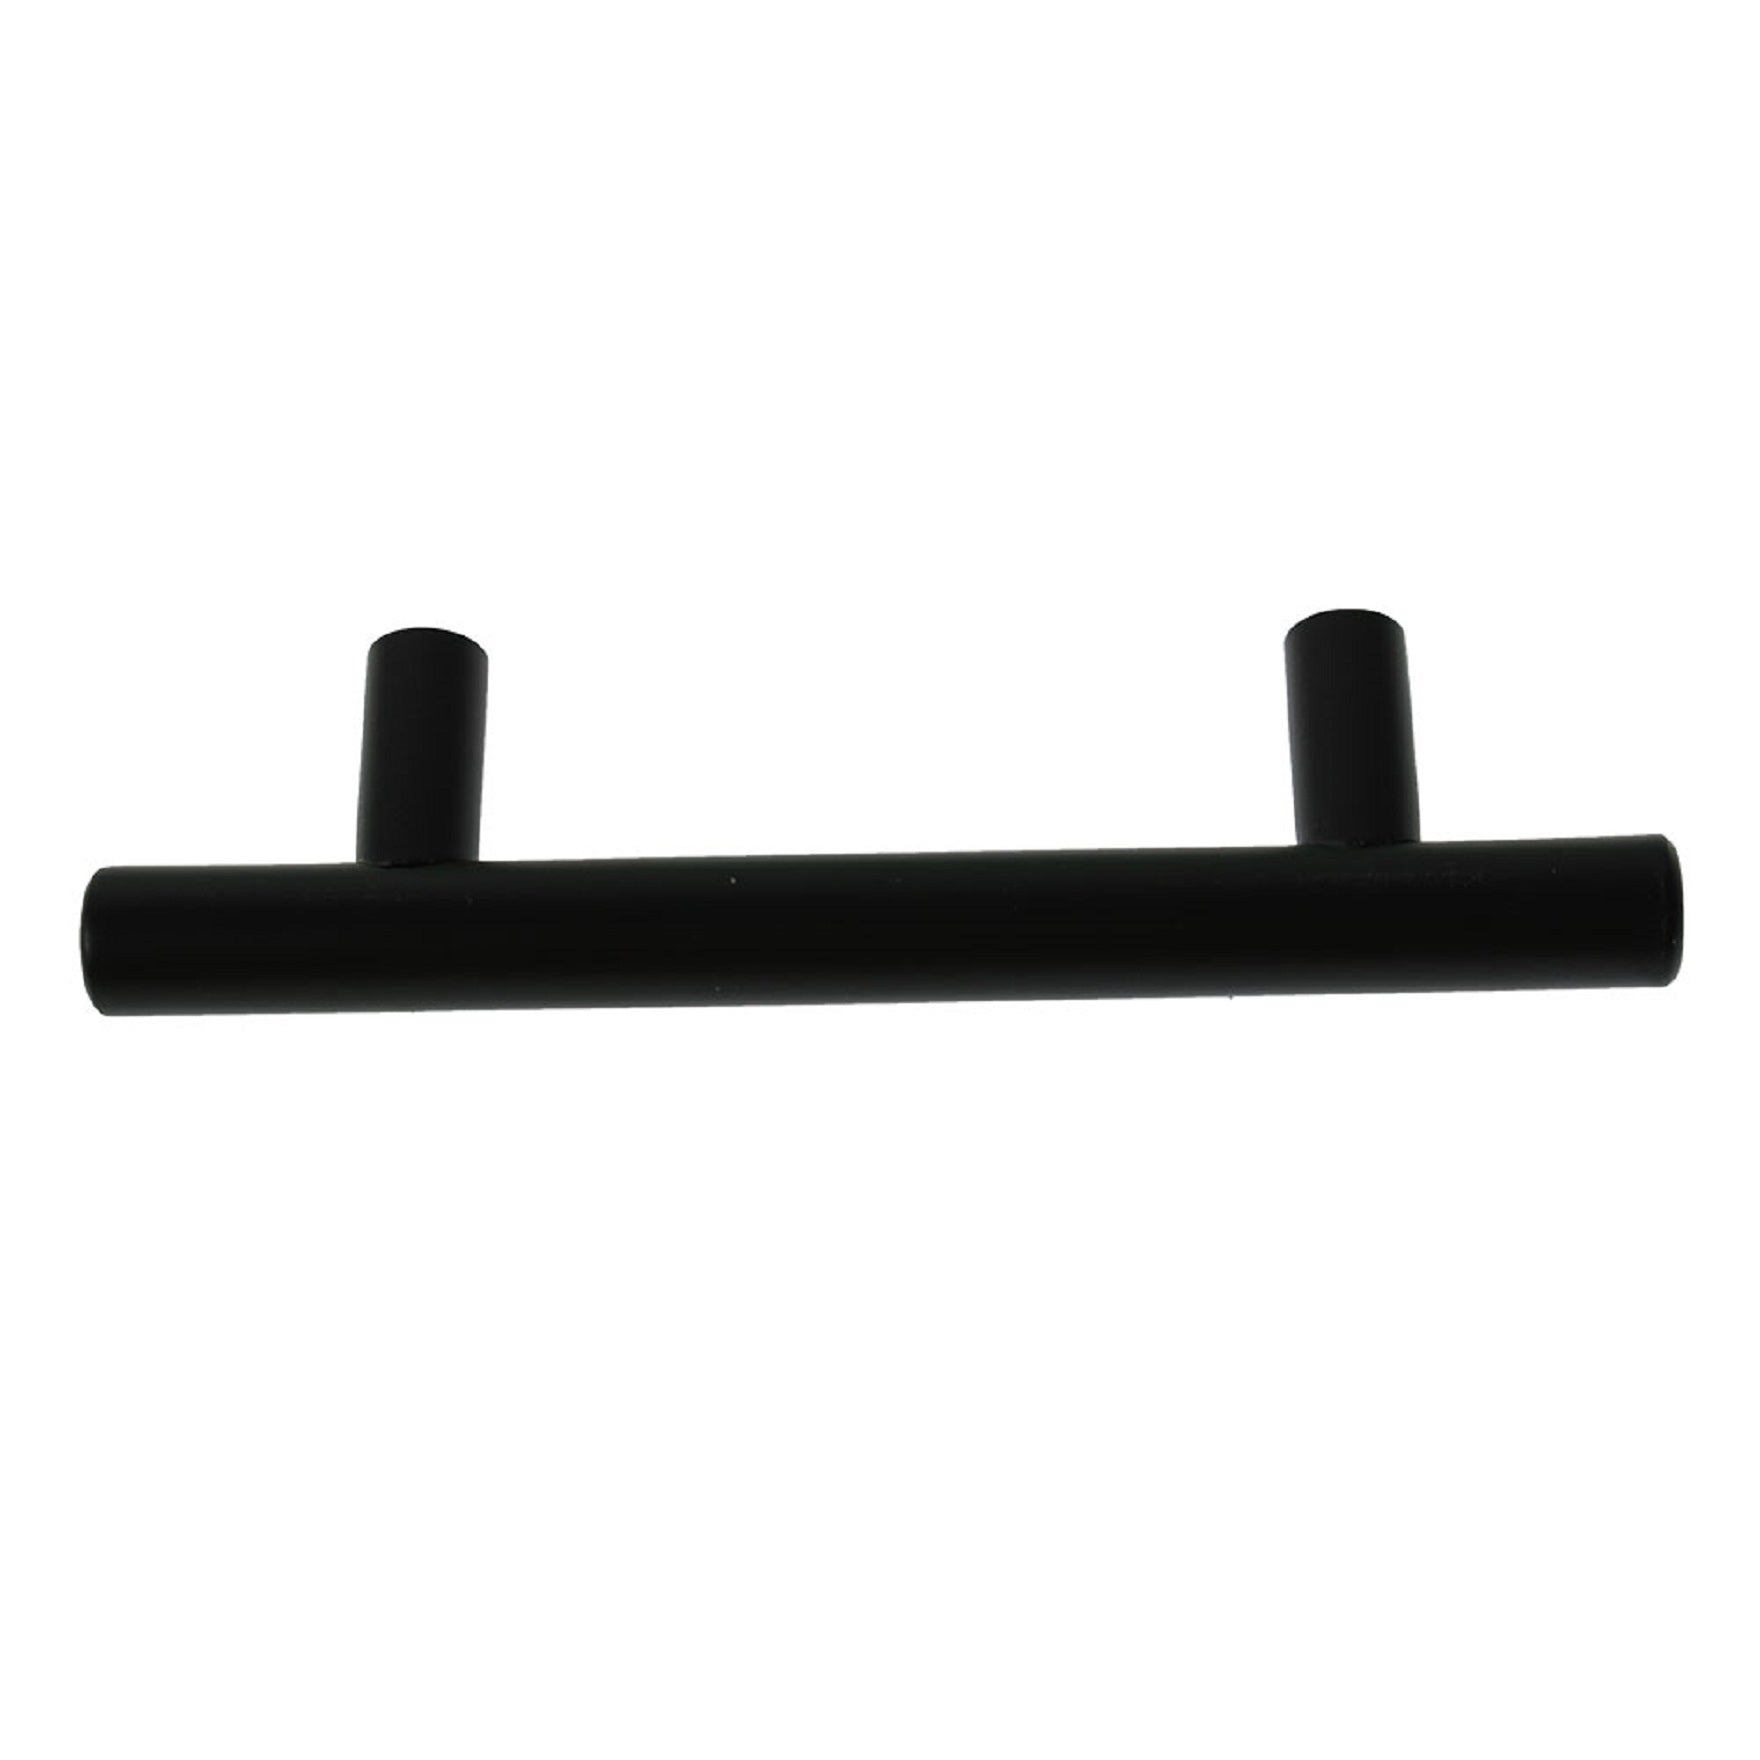 findmall 50 Pack 5 Inch Cabinet Handle Black Stainless Steel Drawer Pulls Cabinet Pulls Bar Kitchen Handles 3 Inch Hole Center FINDMALLPARTS